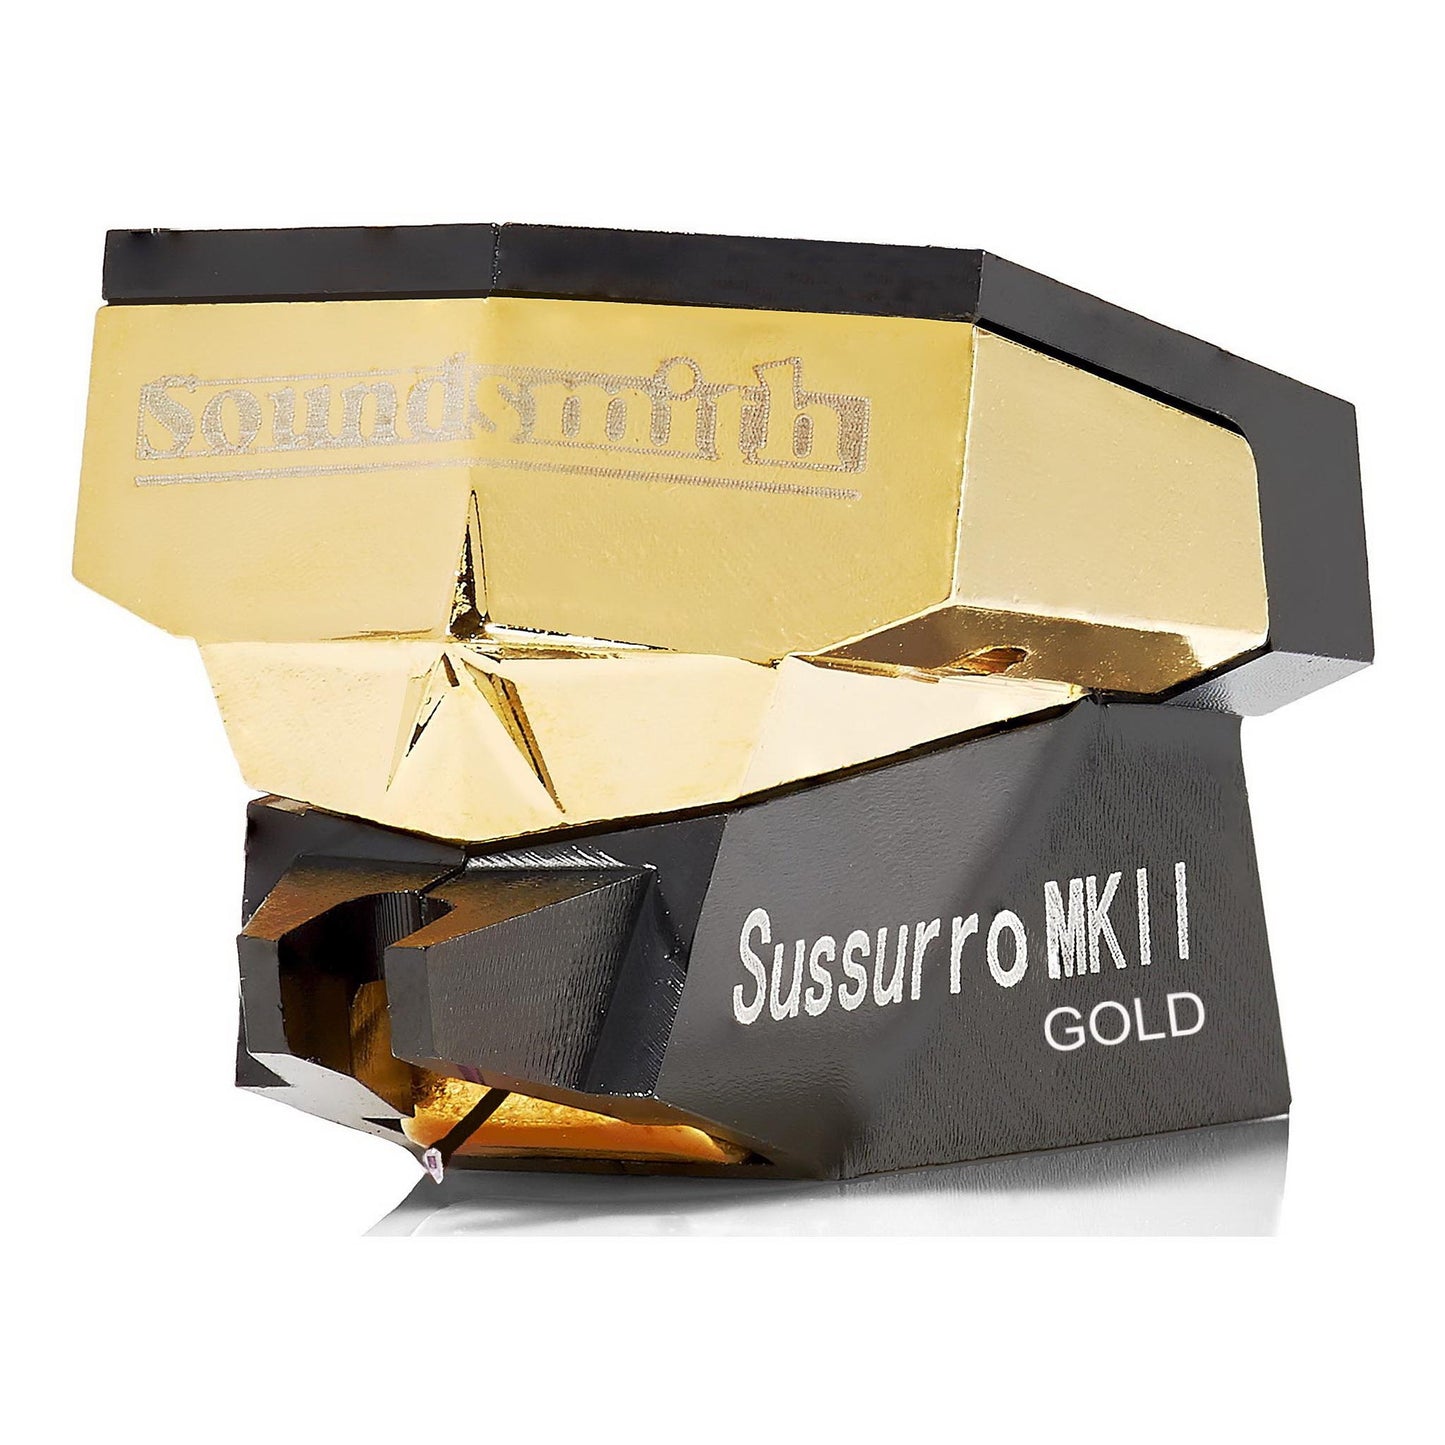 Soundsmith Sussurro Gold Mk II ES Limited Edition Moving Iron Cartridge